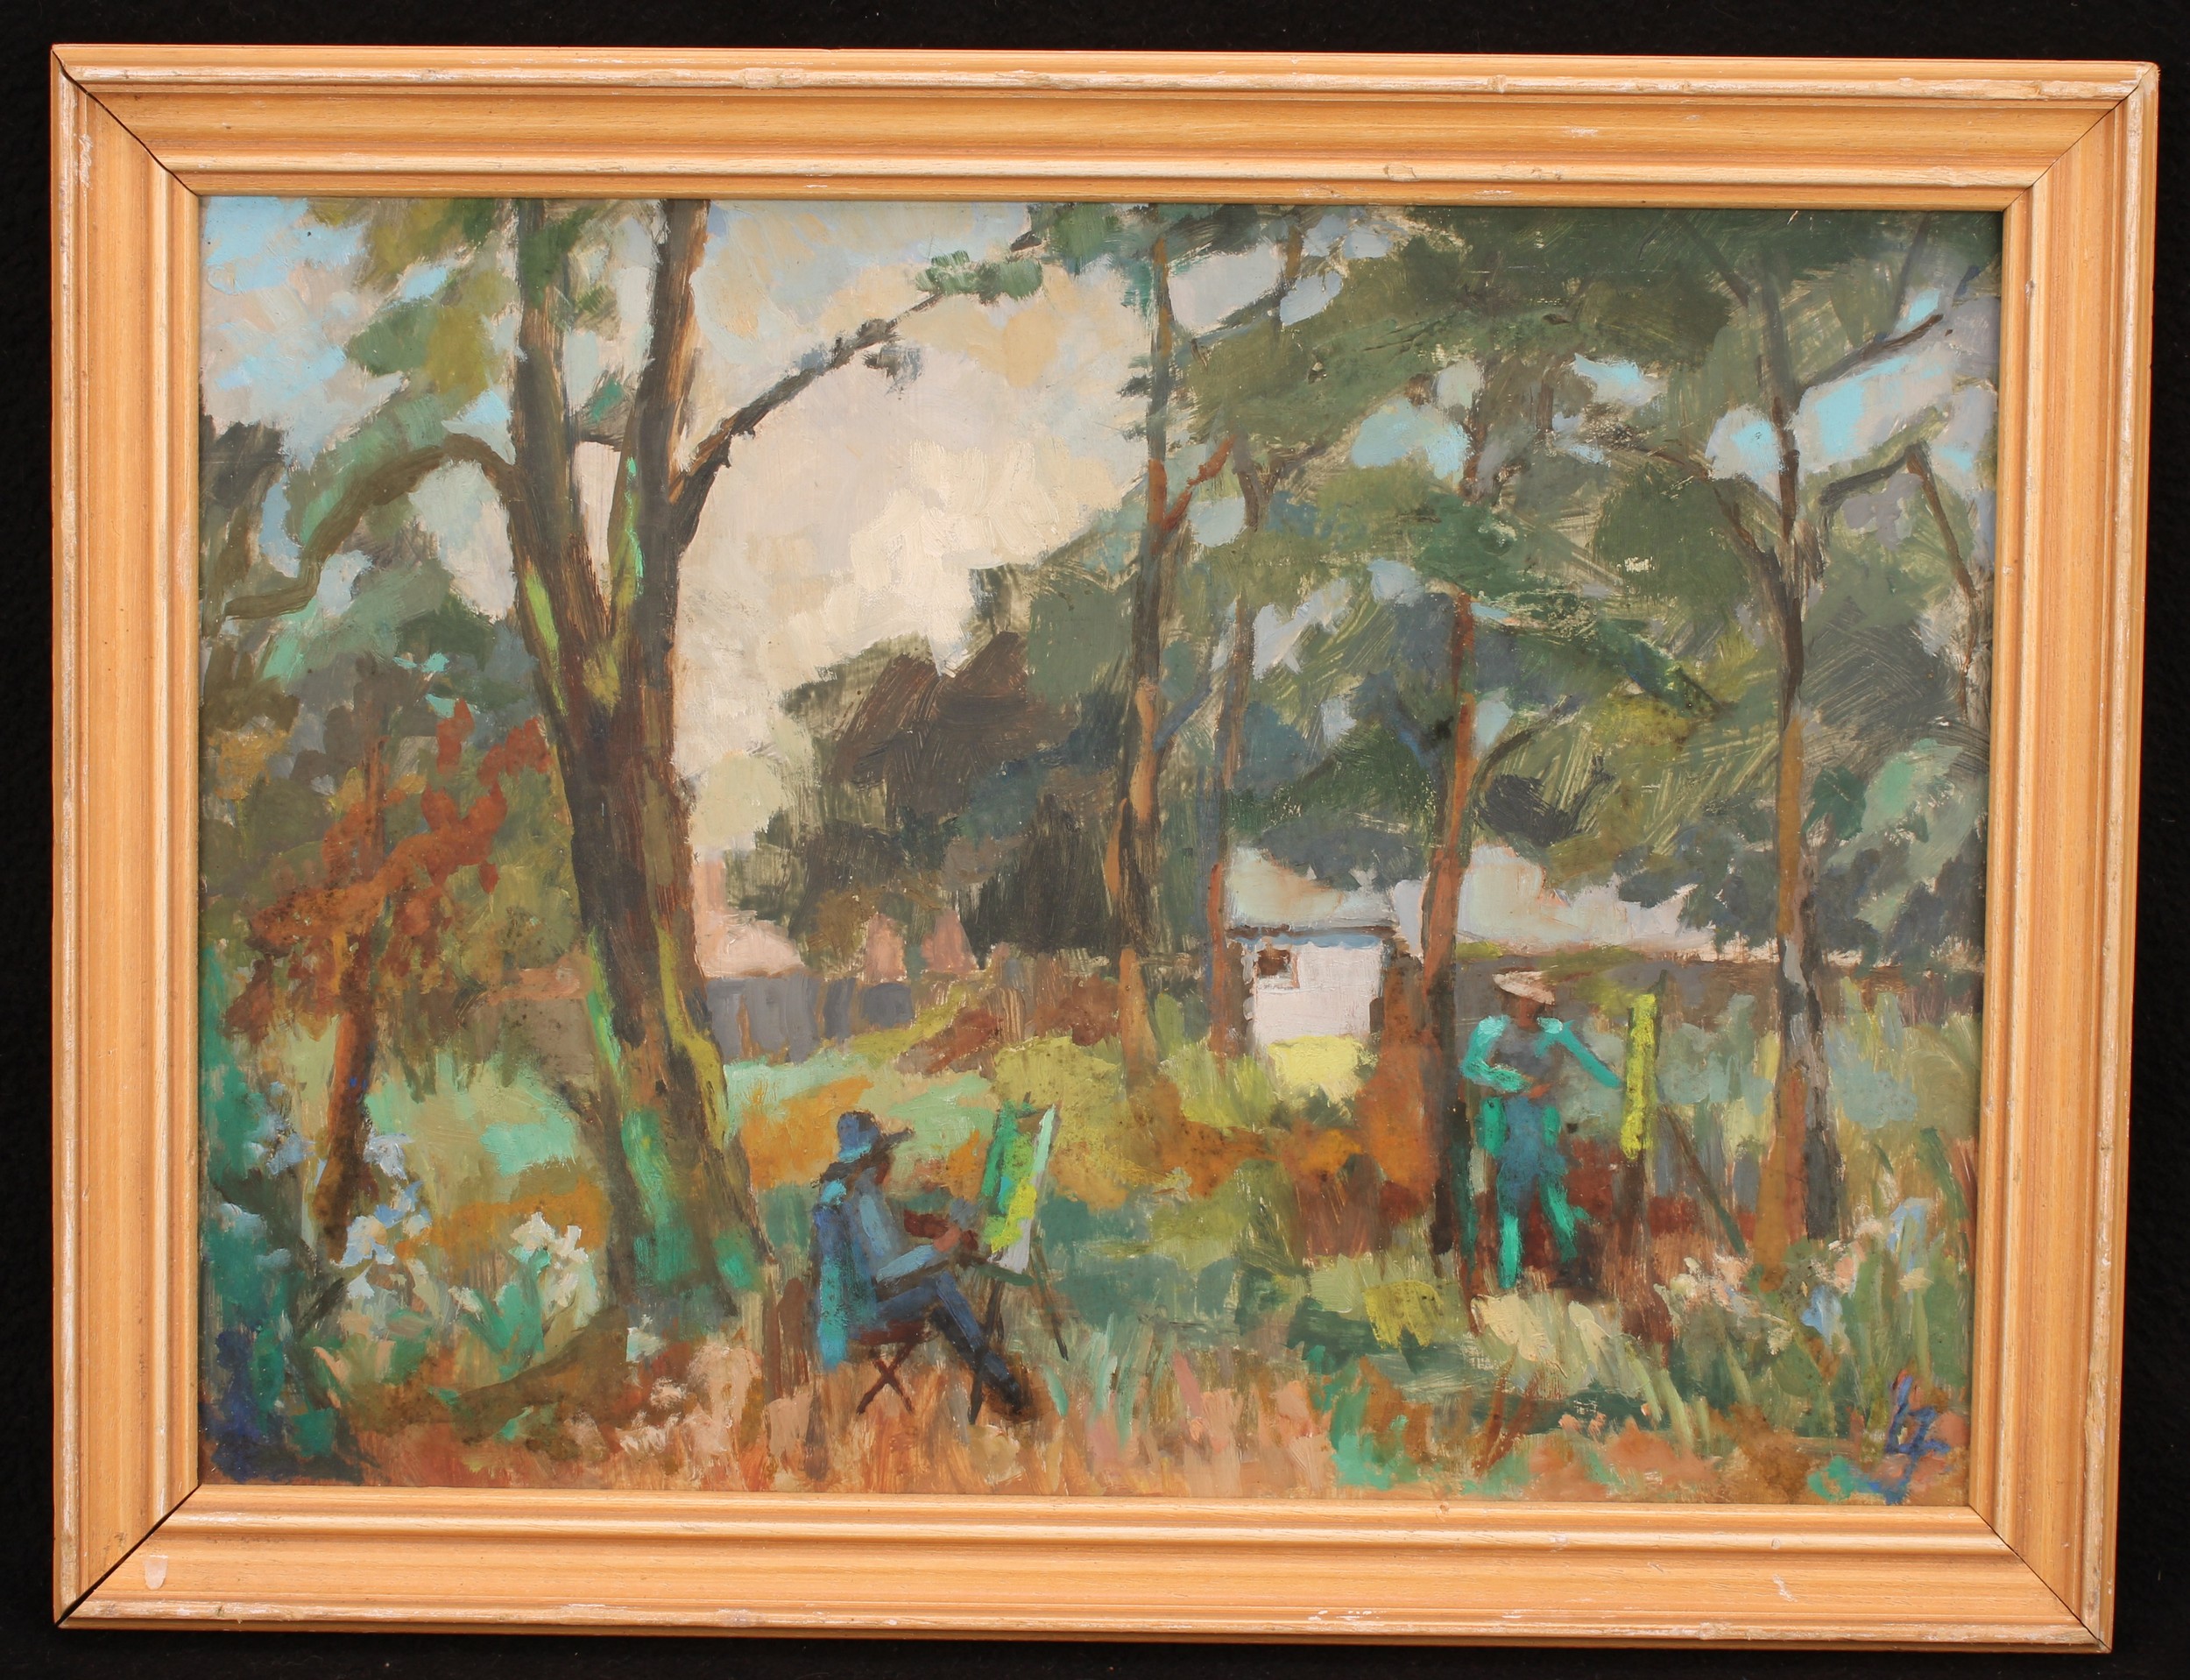 Laure Jessop (20th century) Sketching at Orleans House, signed with monogram, oil on hardboard, 28cm - Image 2 of 3